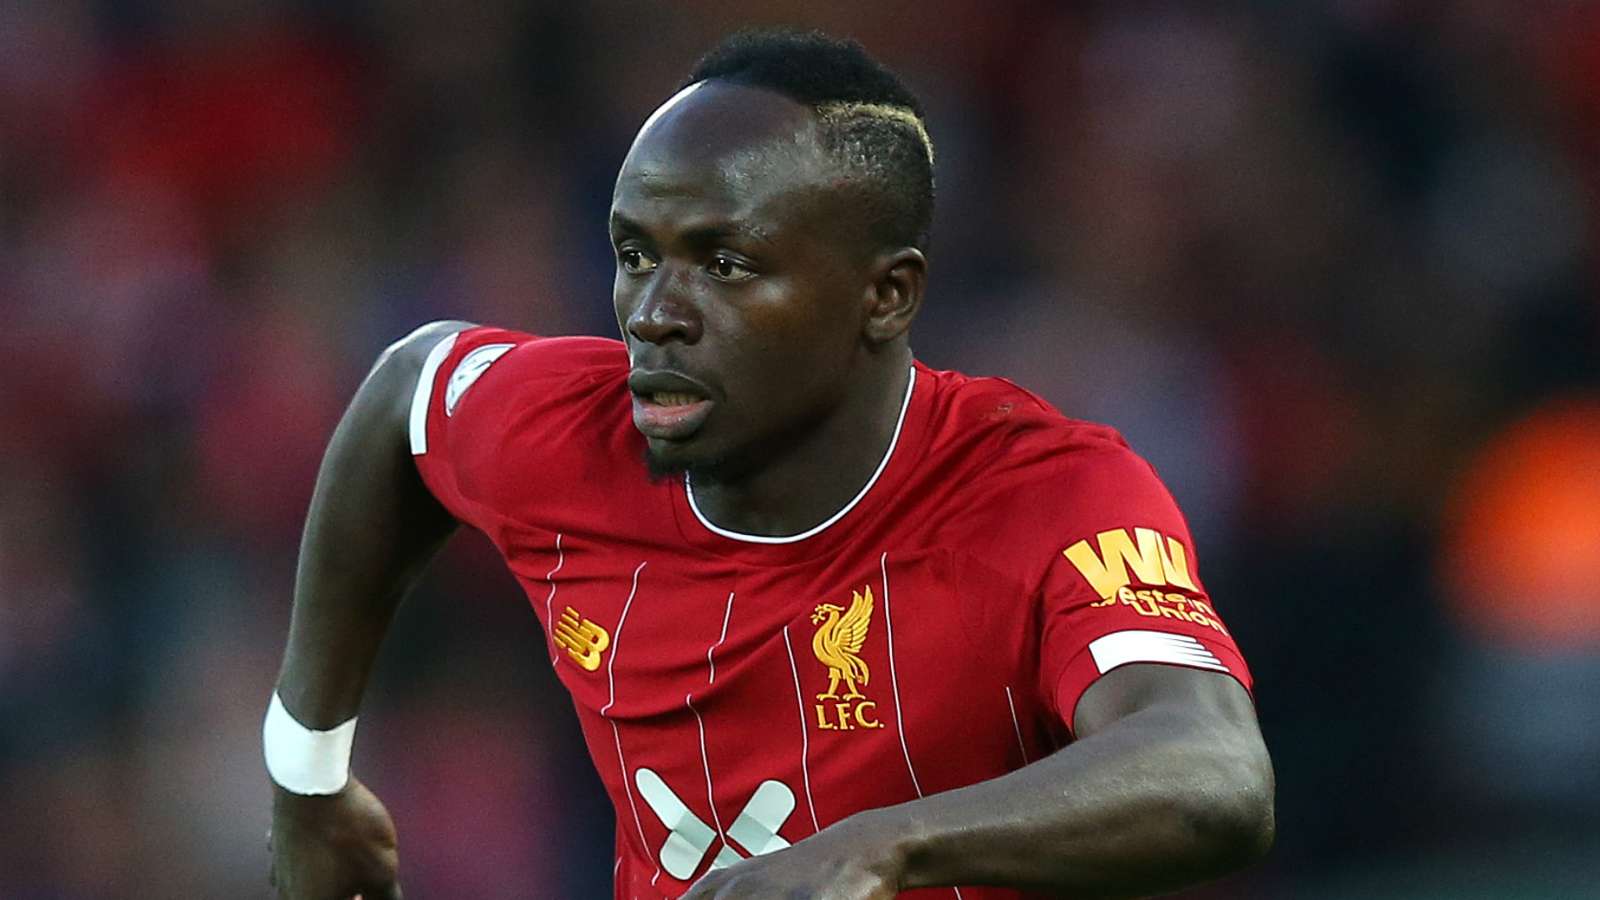 'These moments make great champions' - Mane urges Liverpool to respond quickly after Chelsea loss - Bóng Đá